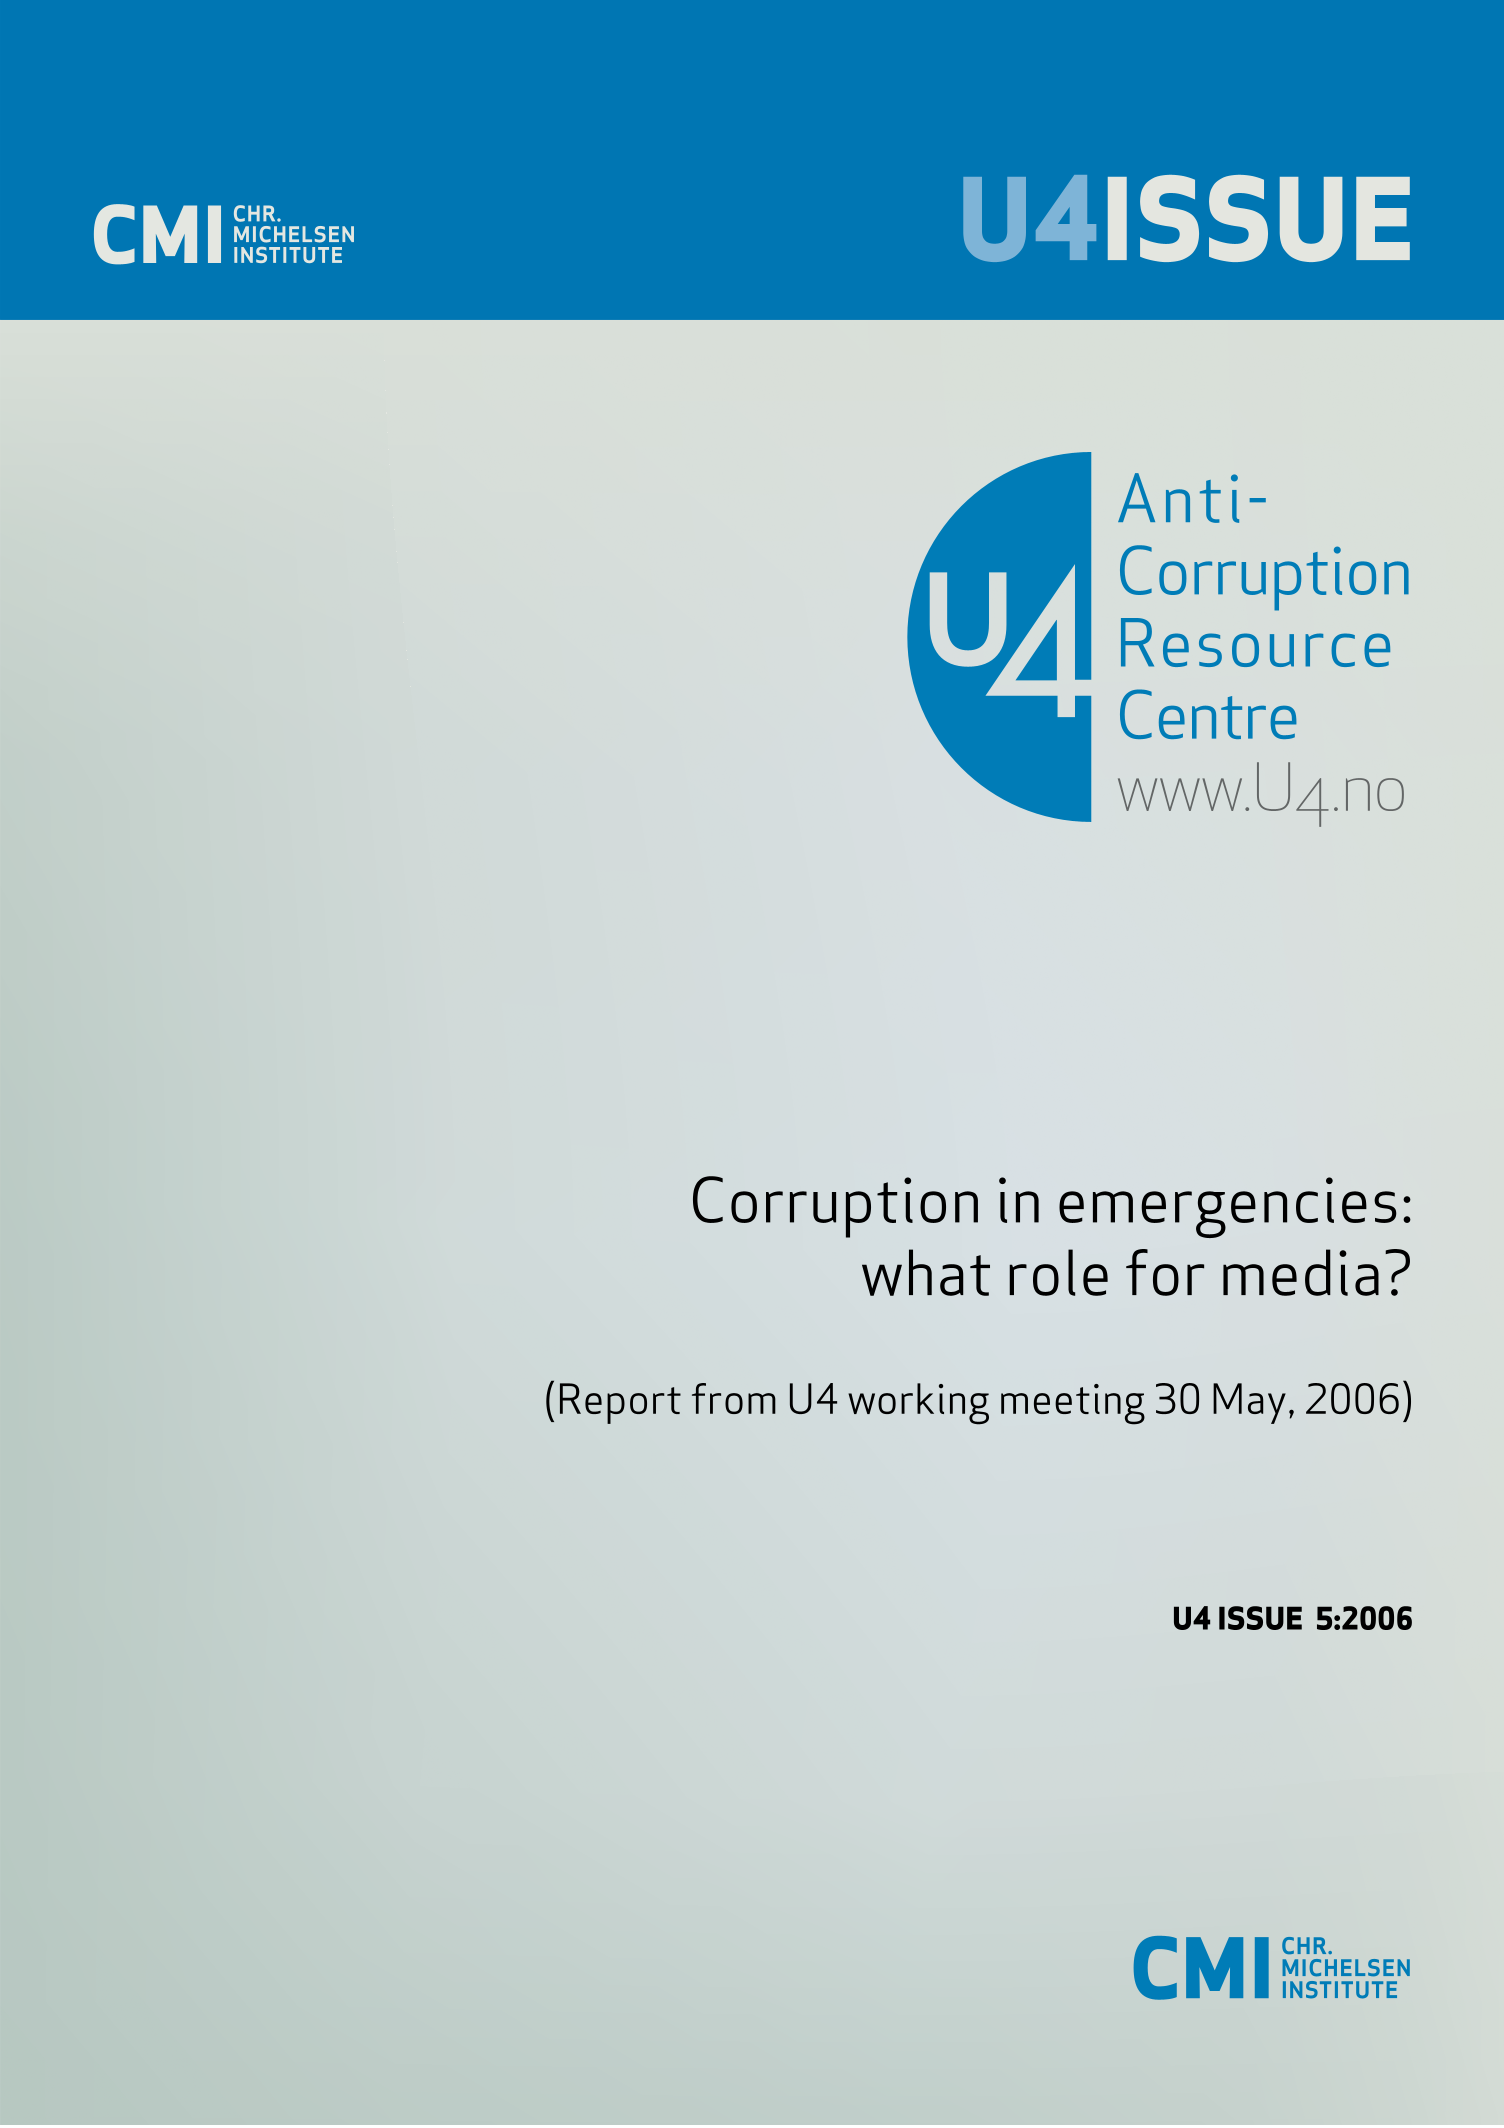 Corruption in emergencies: What role for media?